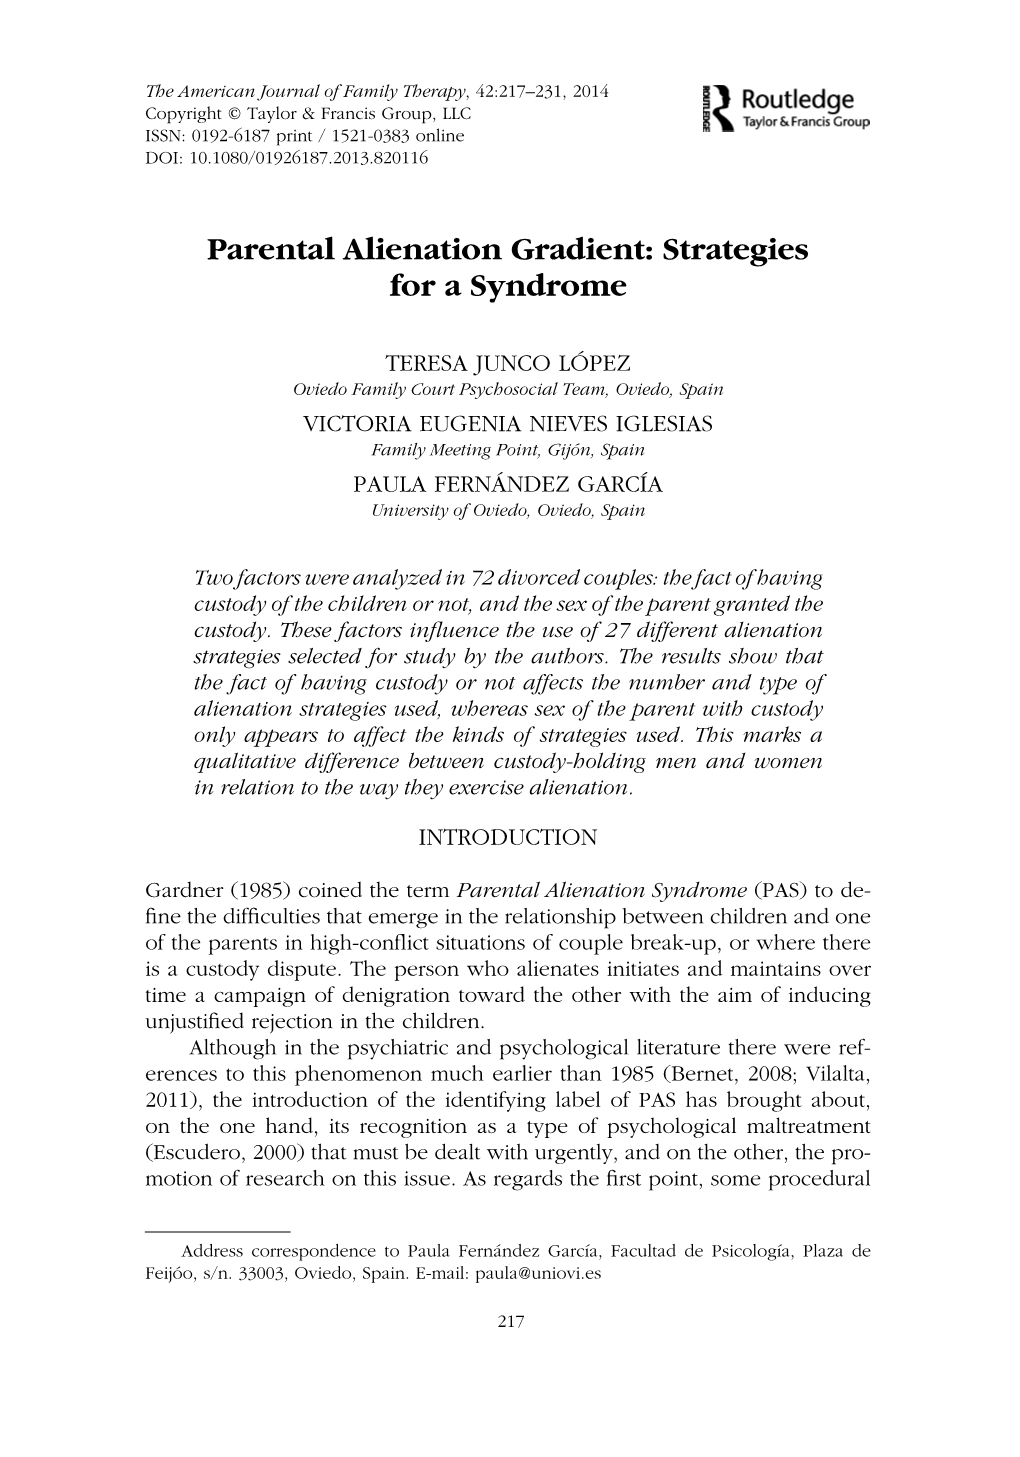 Parental Alienation Gradient: Strategies for a Syndrome